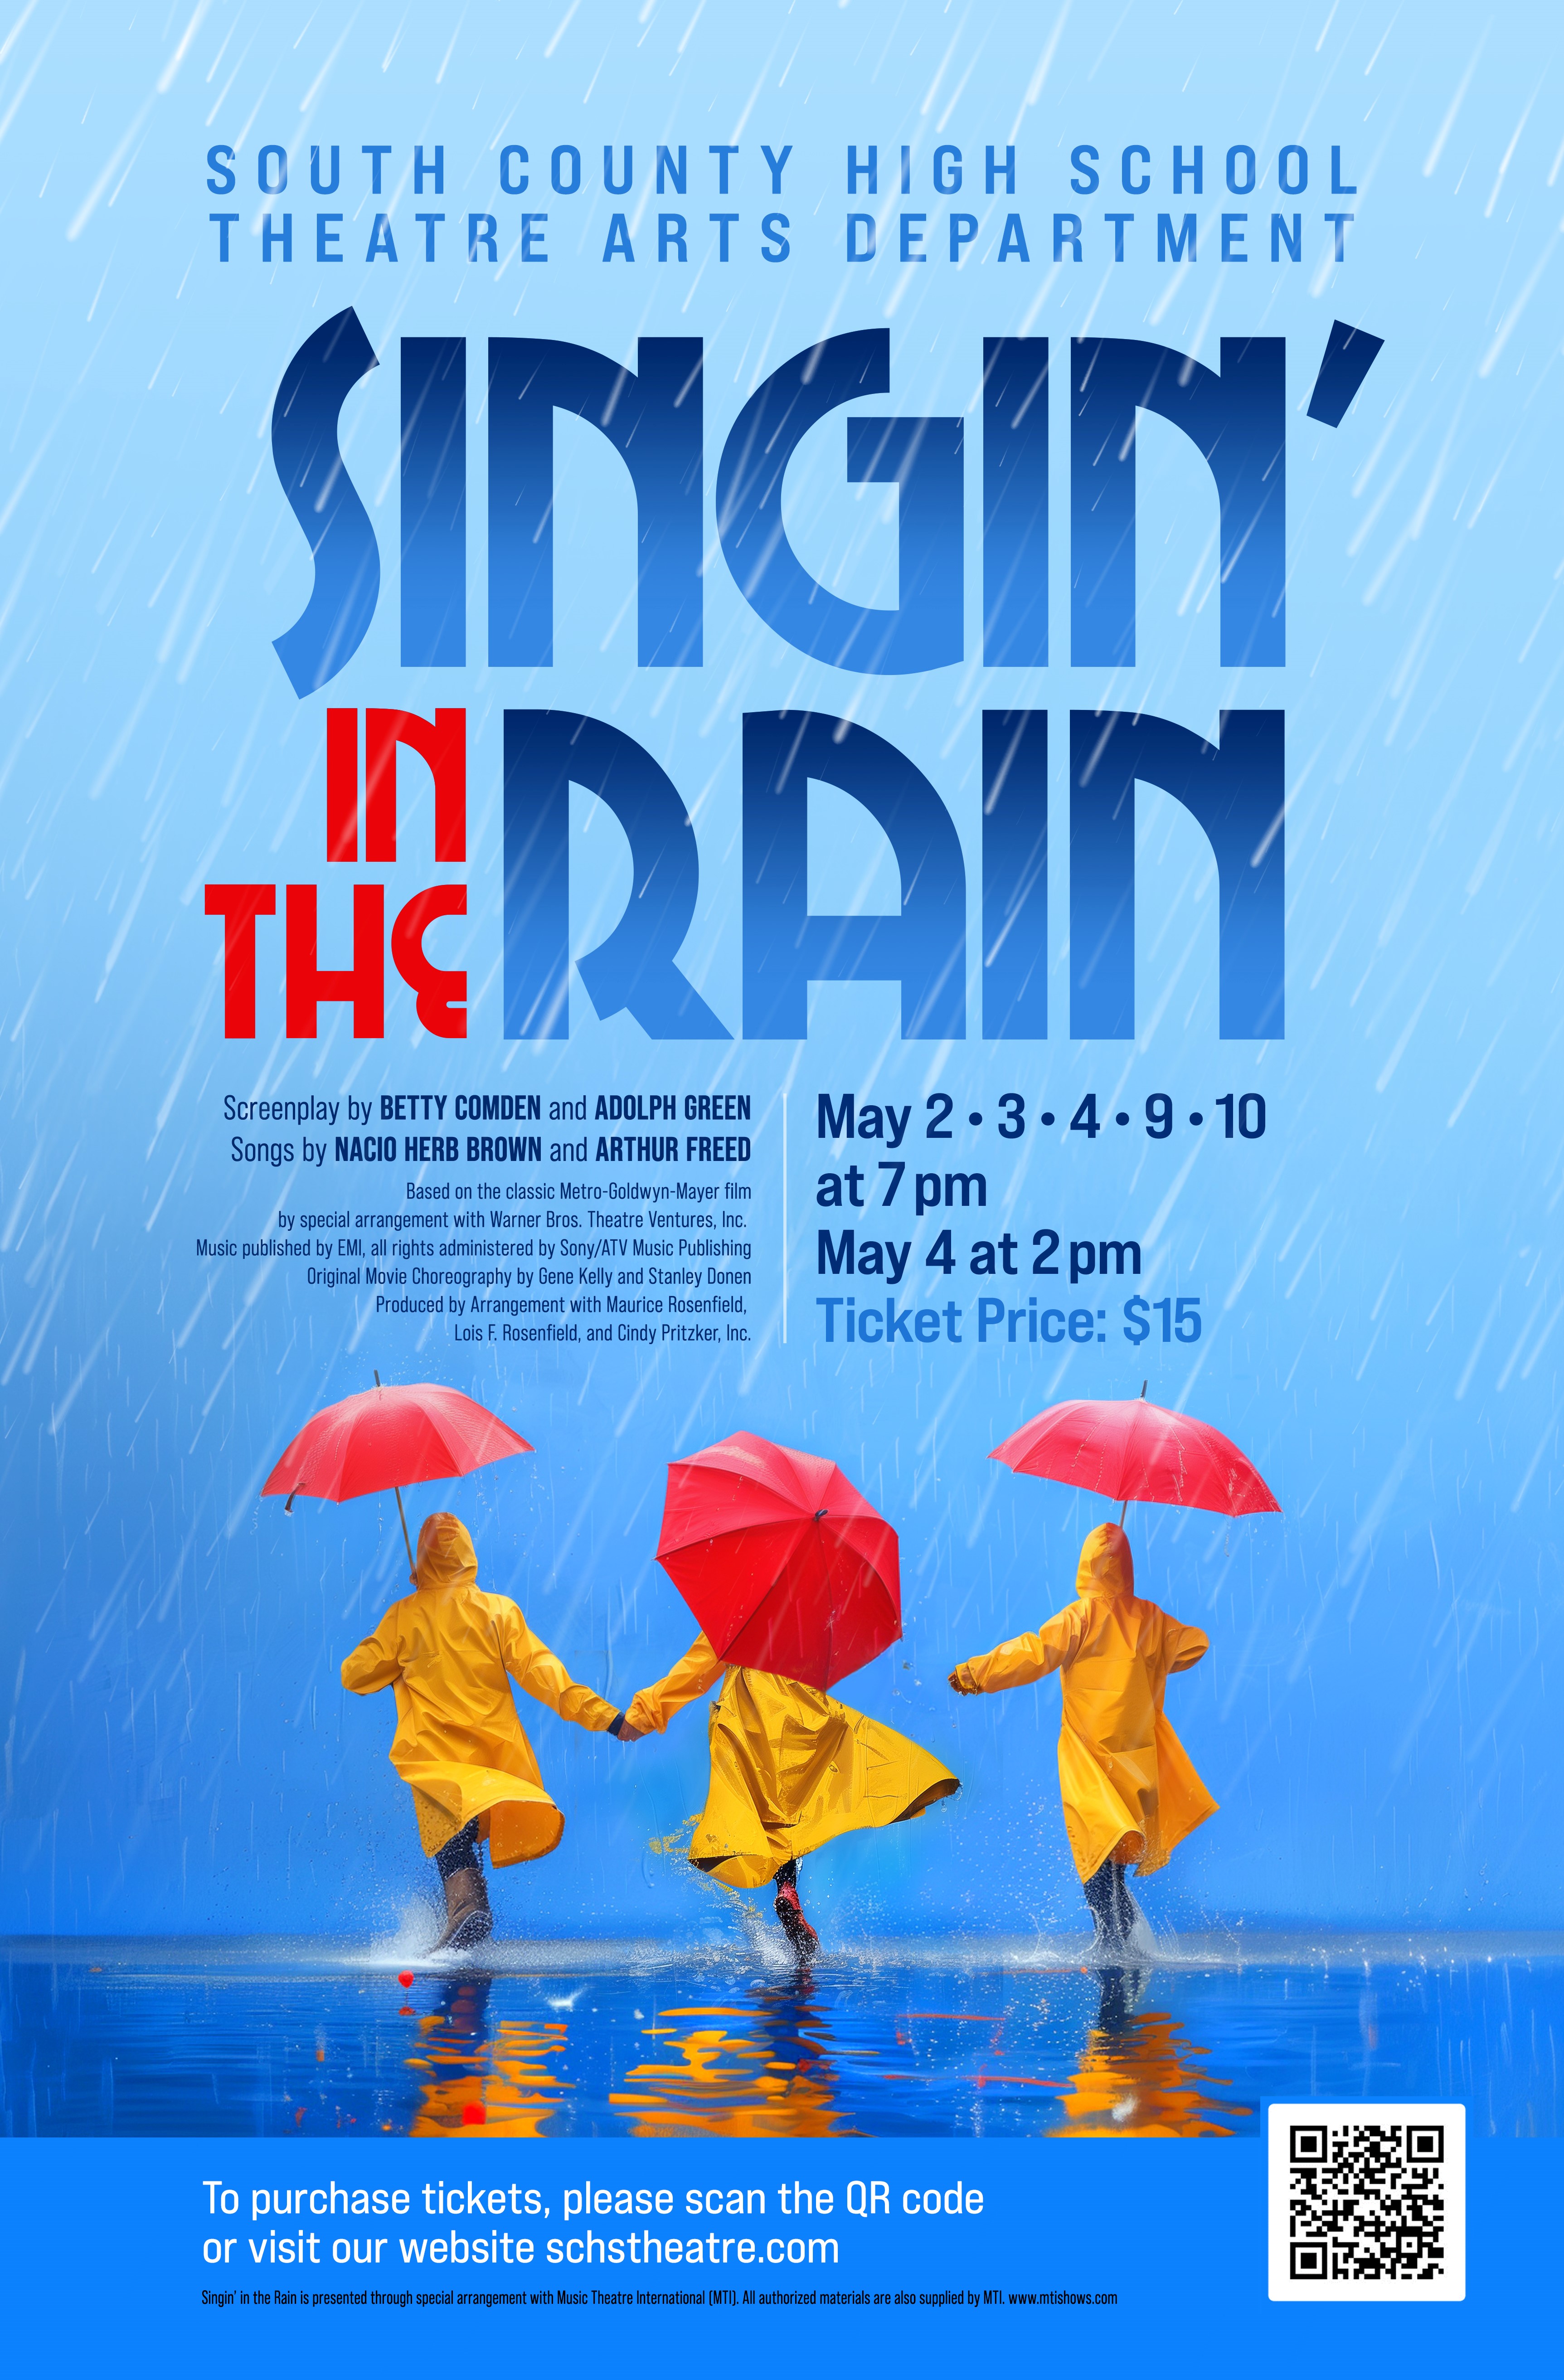 SCHS Theater presents "Singin in the Rain," Showtimes on May 2, 3, 4, 9, an 10 at 7 pm. May 4 will be at 2 pm. Tickets are $15